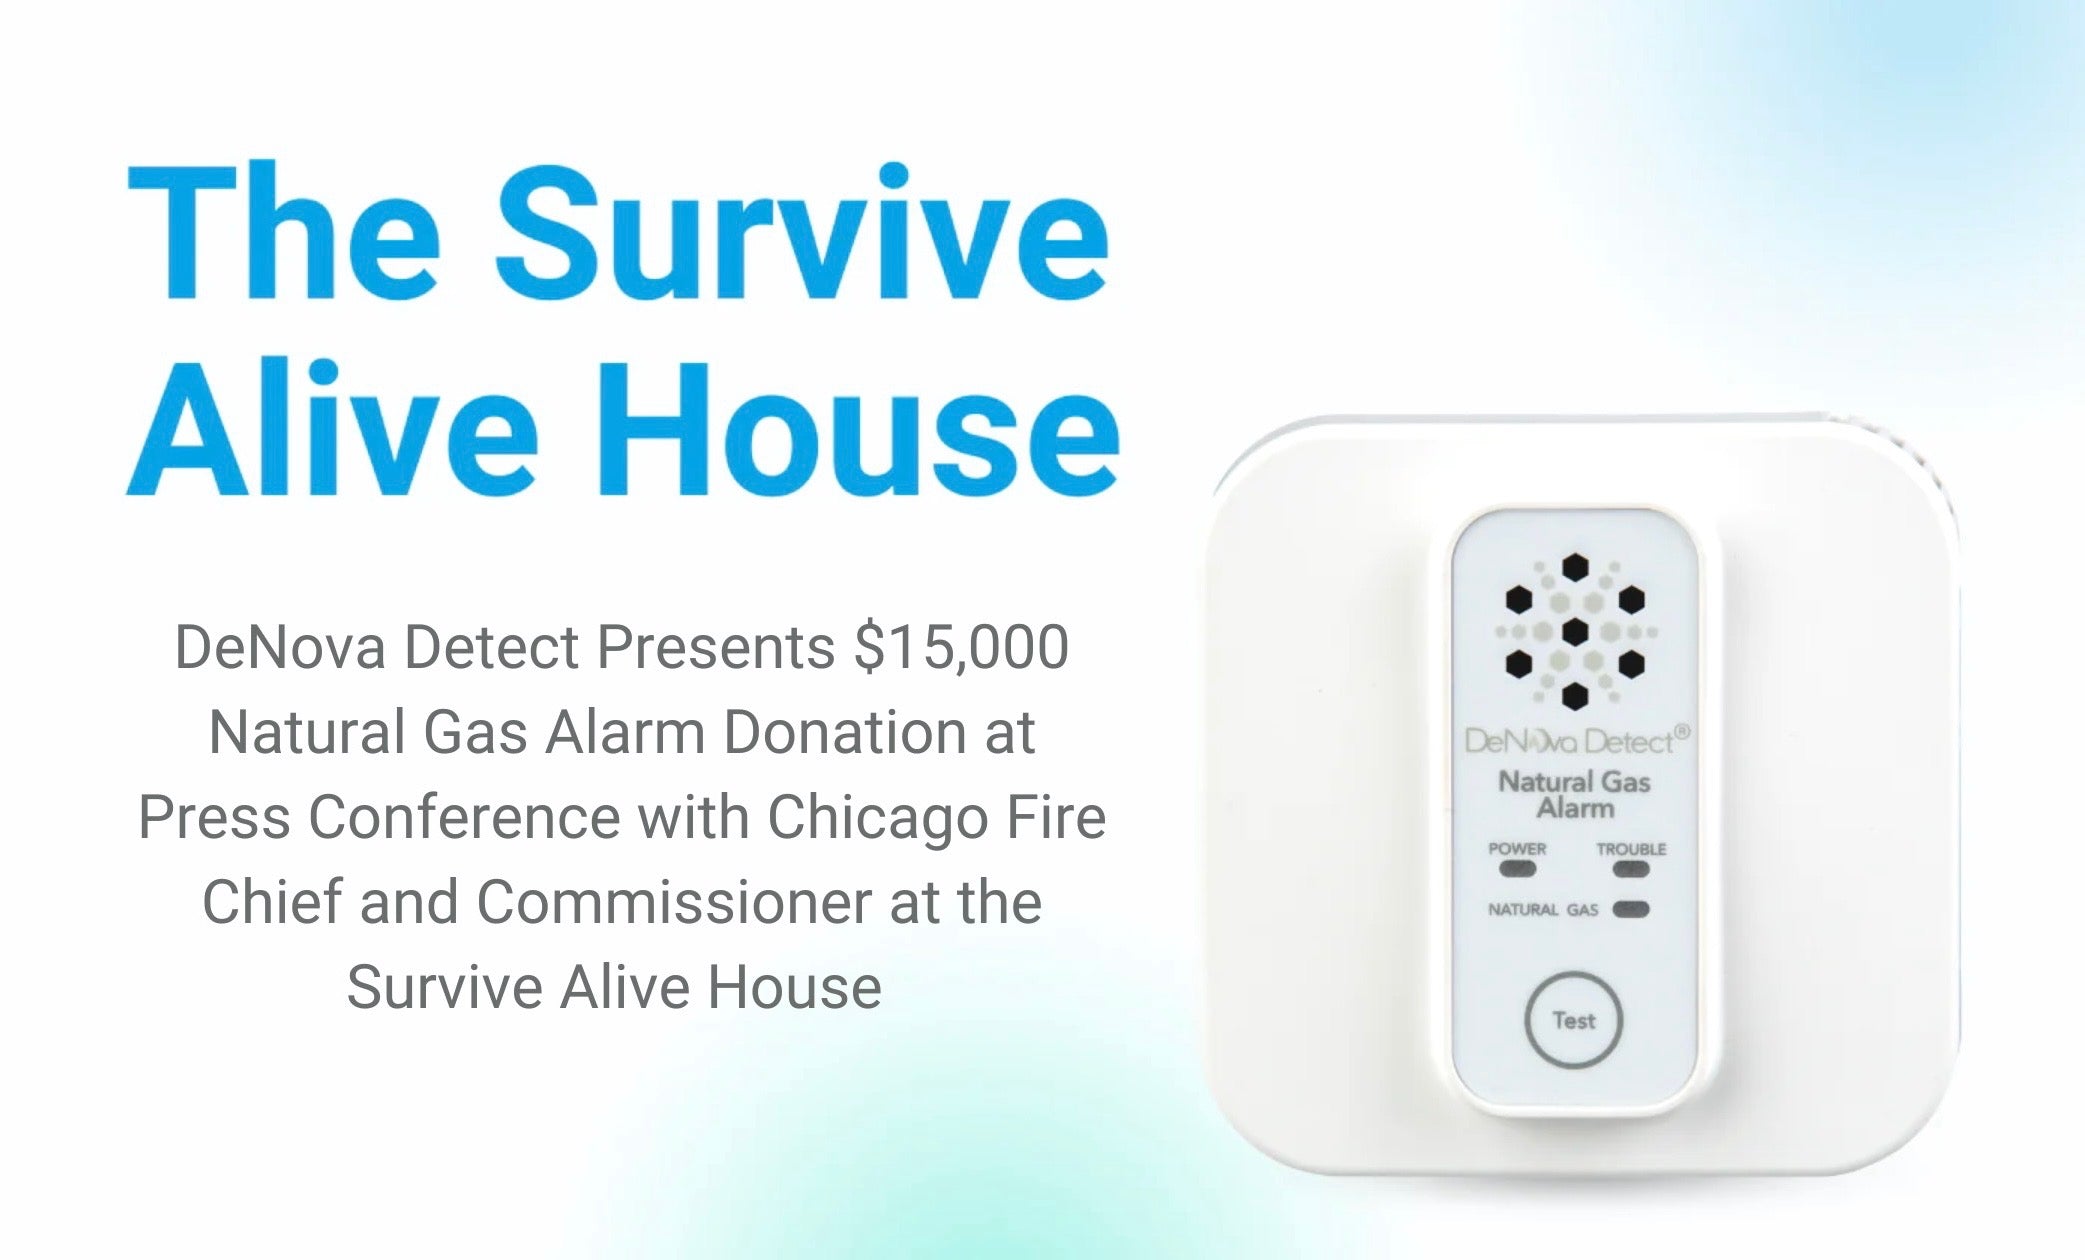 DeNova Detect Meets with Chicago Fire Chief and Commissioner to Donate $15,000 Worth of Natural Gas Alarms to Seniors